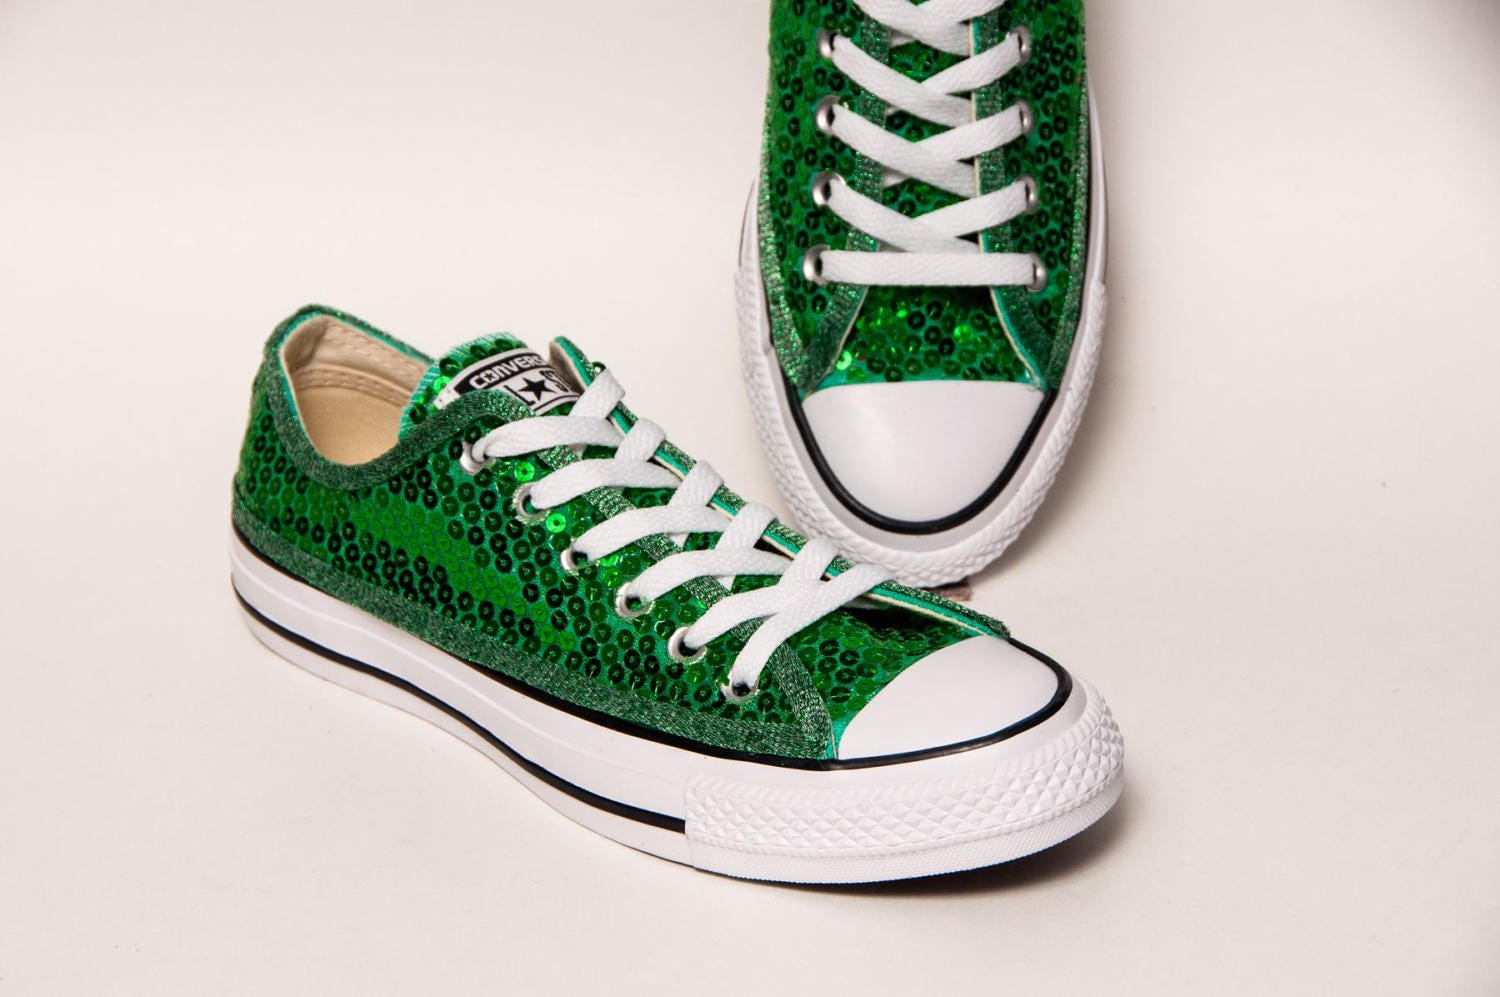 Sequin Kelly Green Canvas Converse Canvas Low Top Sneakers